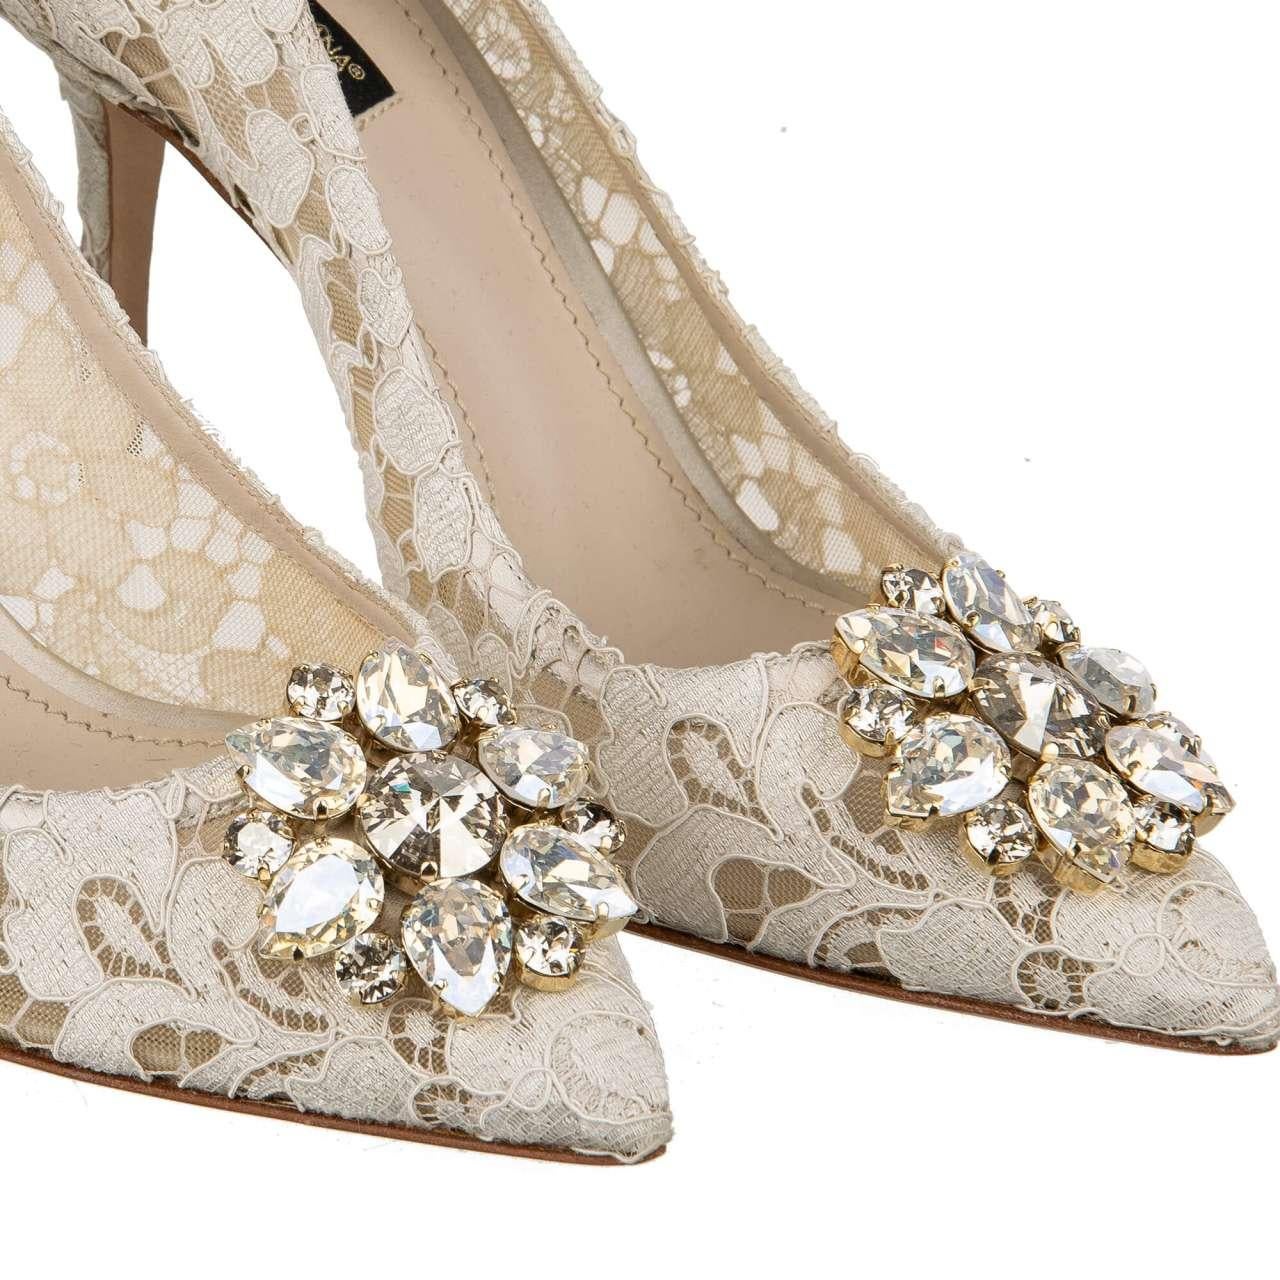 - Taormina lace pointed Pumps BELLUCCI with crystals brooch in beige by DOLCE & GABBANA - New with Box - MADE IN ITALY - Former RRP: EUR 695 - Crystals brooch in front - Model: CD0101-AL198-80005 - Material: 59% Rayon, 30% Cotton, 7% Silk, 4%